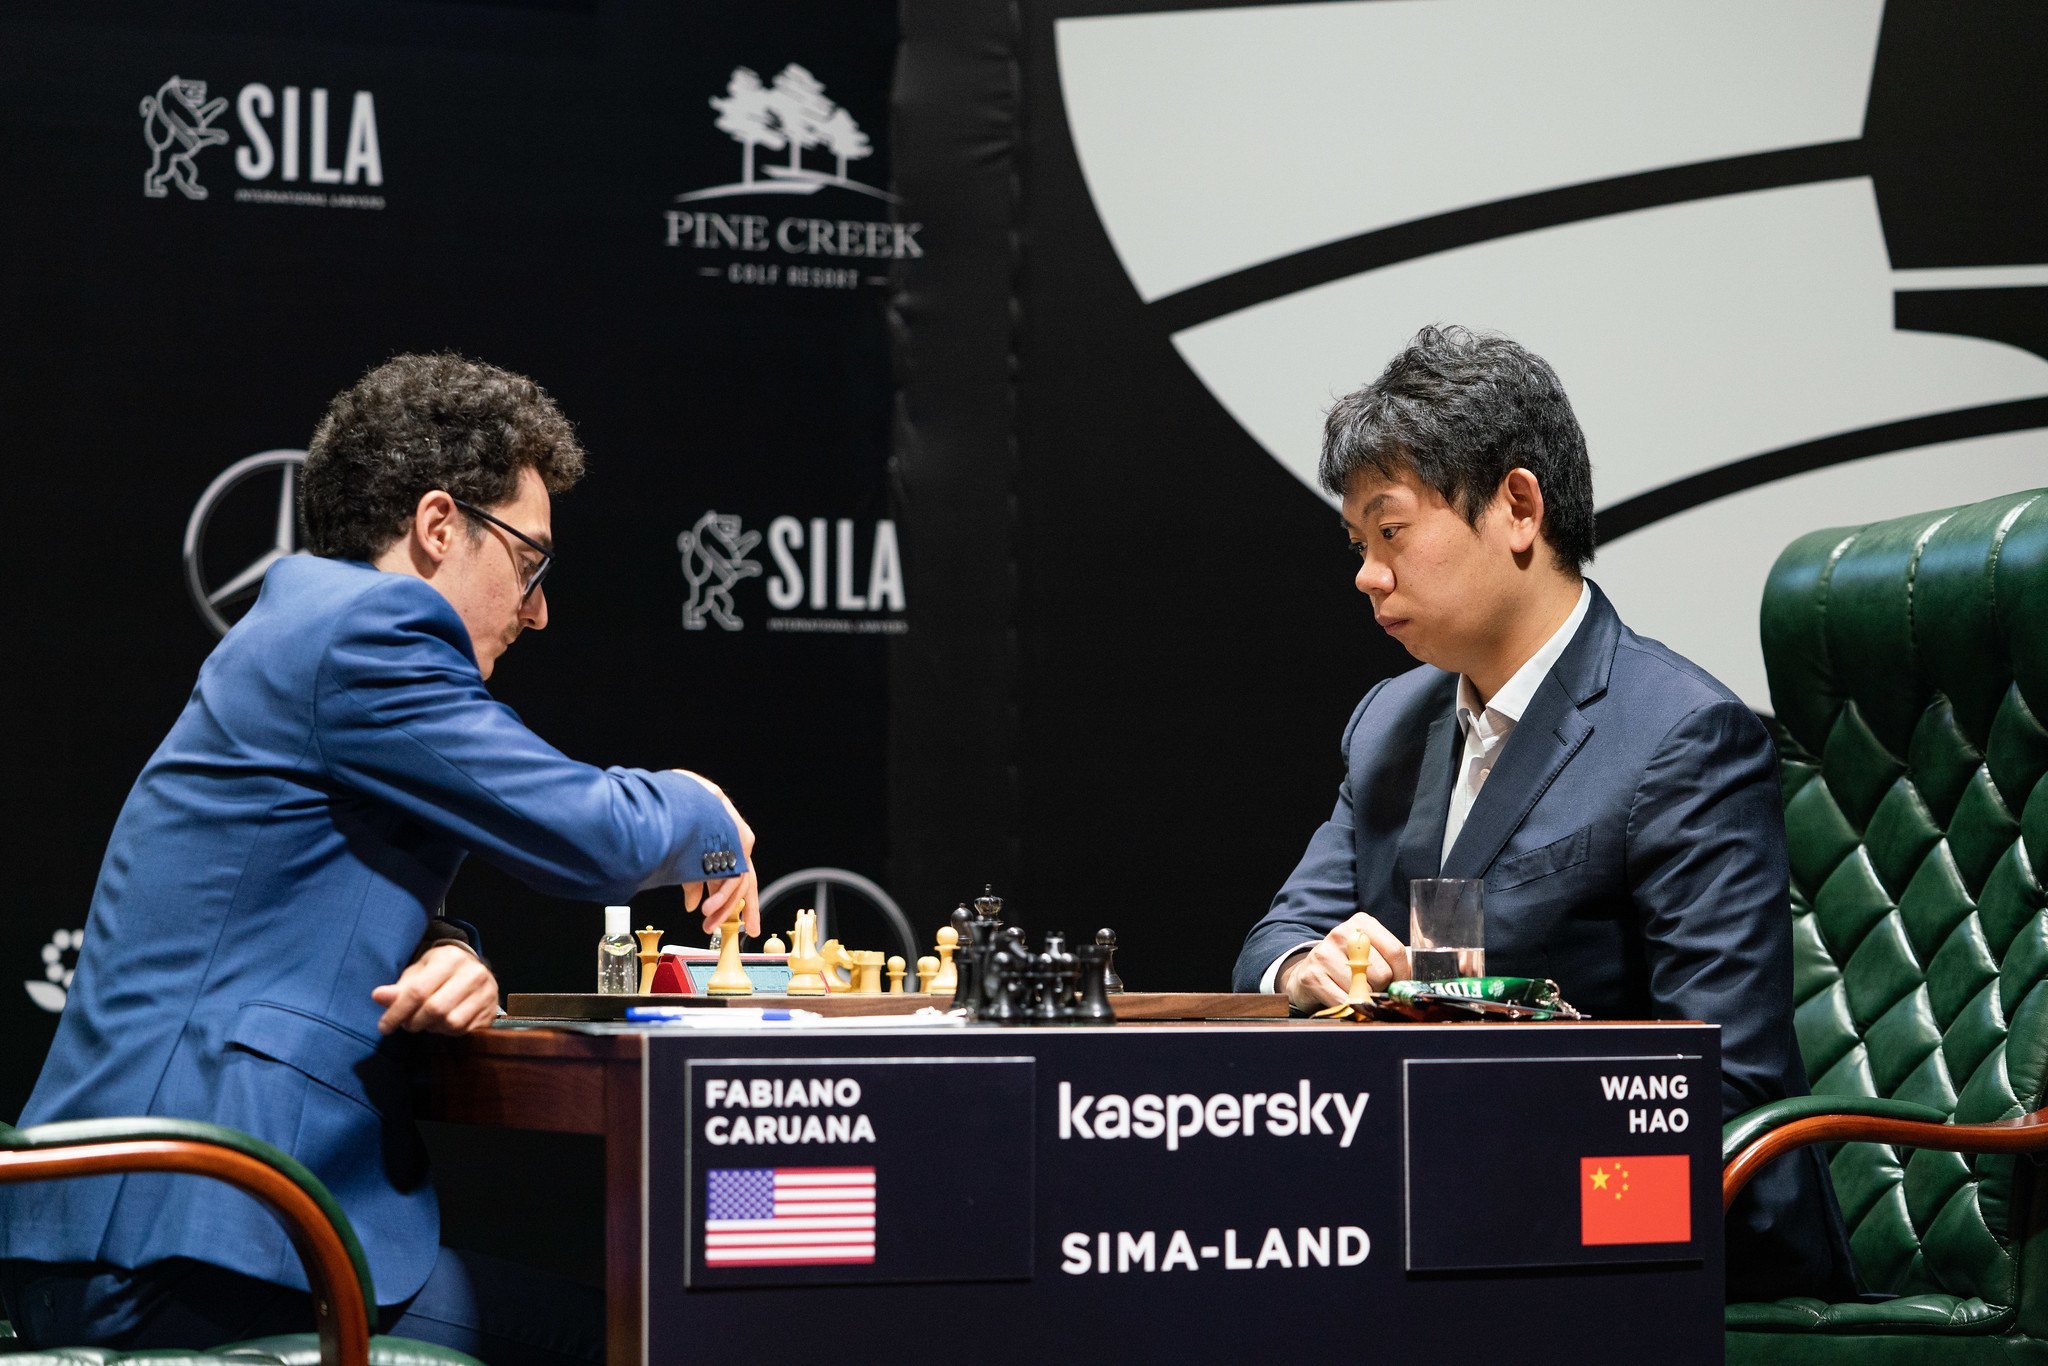 FIDE stops the Candidates Tournament